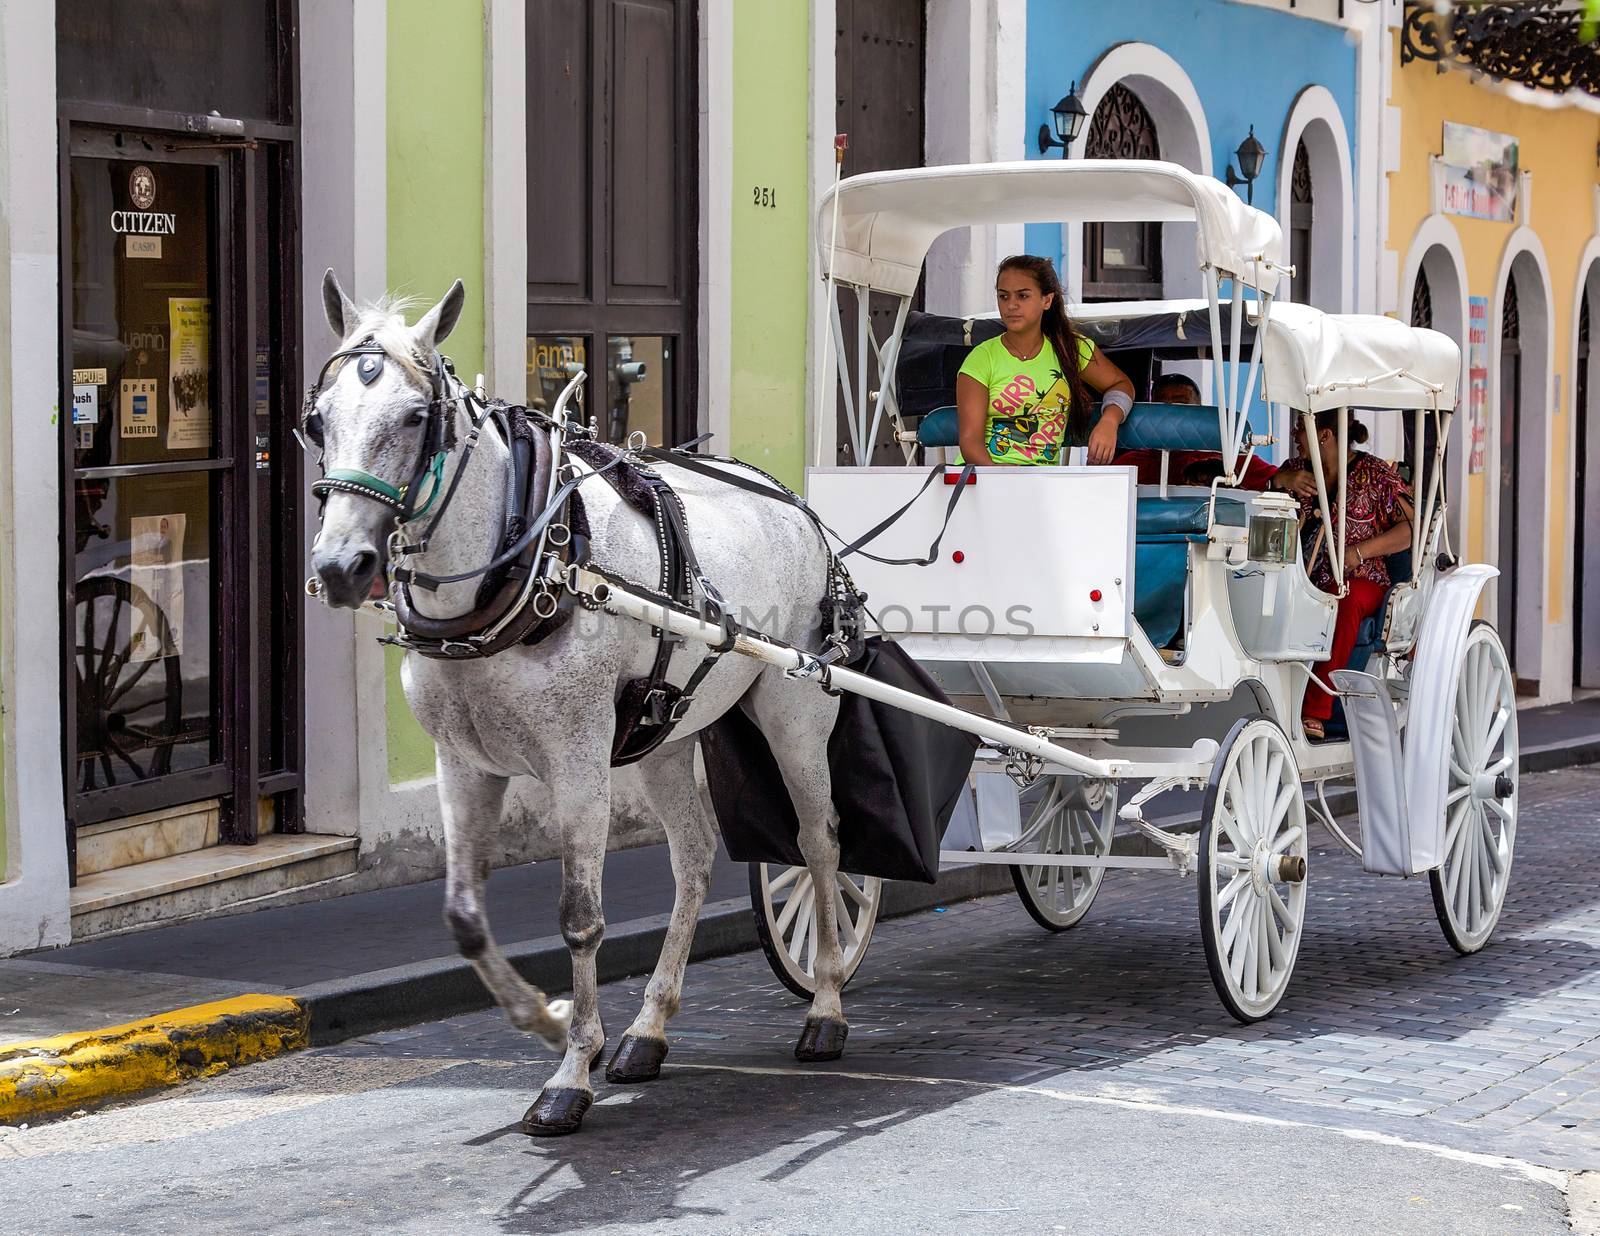 San Juan, Puerto Rico- June 16, 2013: A couple of tourists or locals are enjoying a unique old fashioned horse and buggy ride in historic Old San Juan, Puerto Rico.